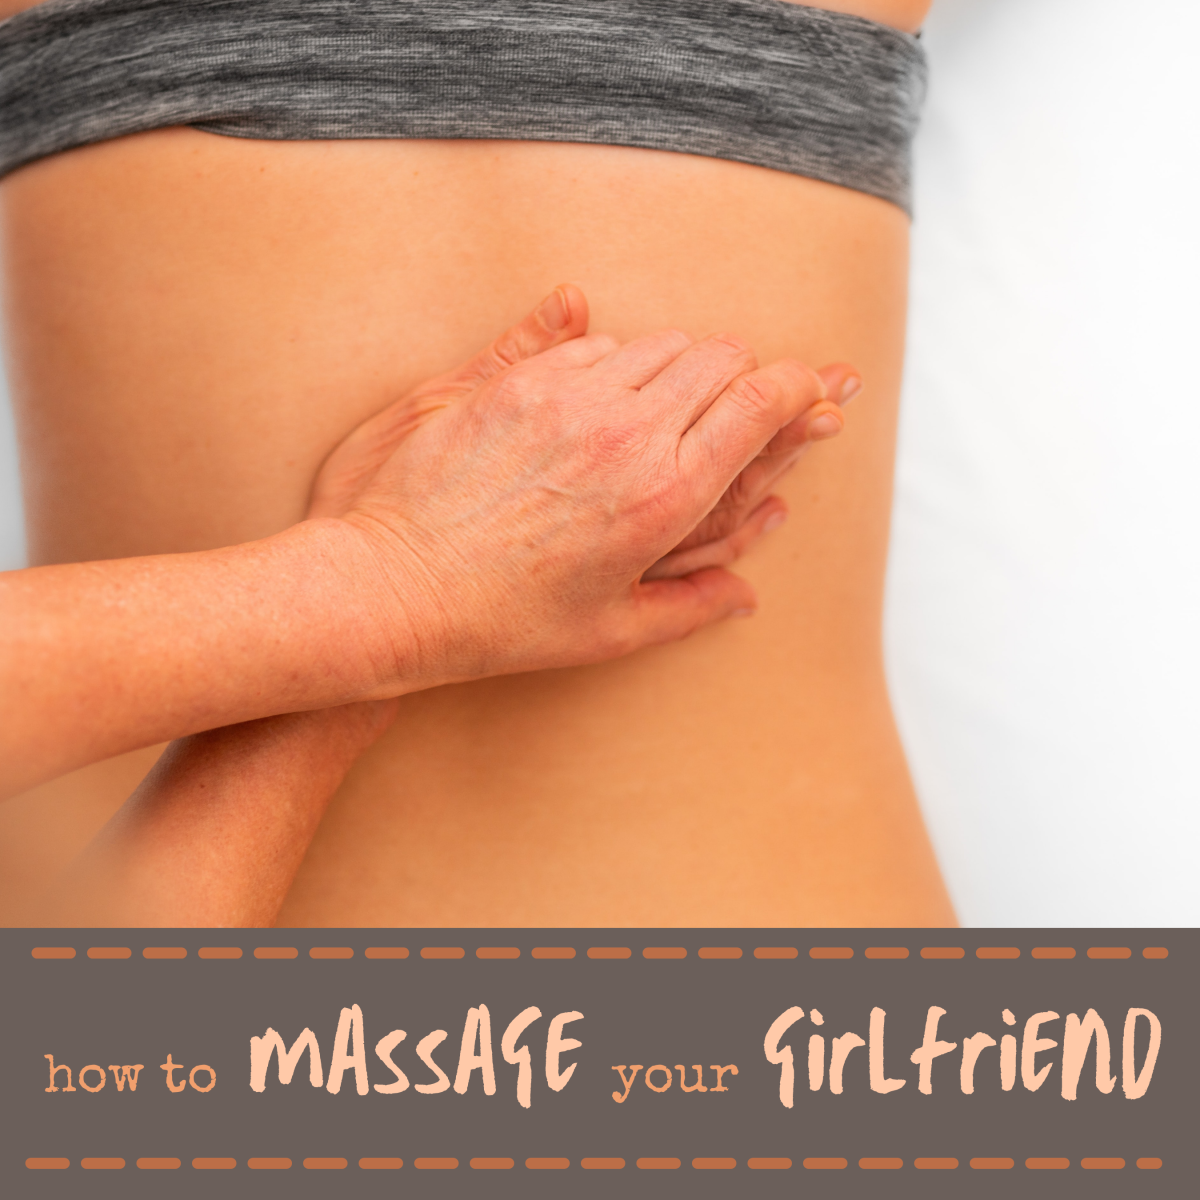 Find out how quick and easy it is to massage your girl and make her feel totally relaxed and de-stressed.